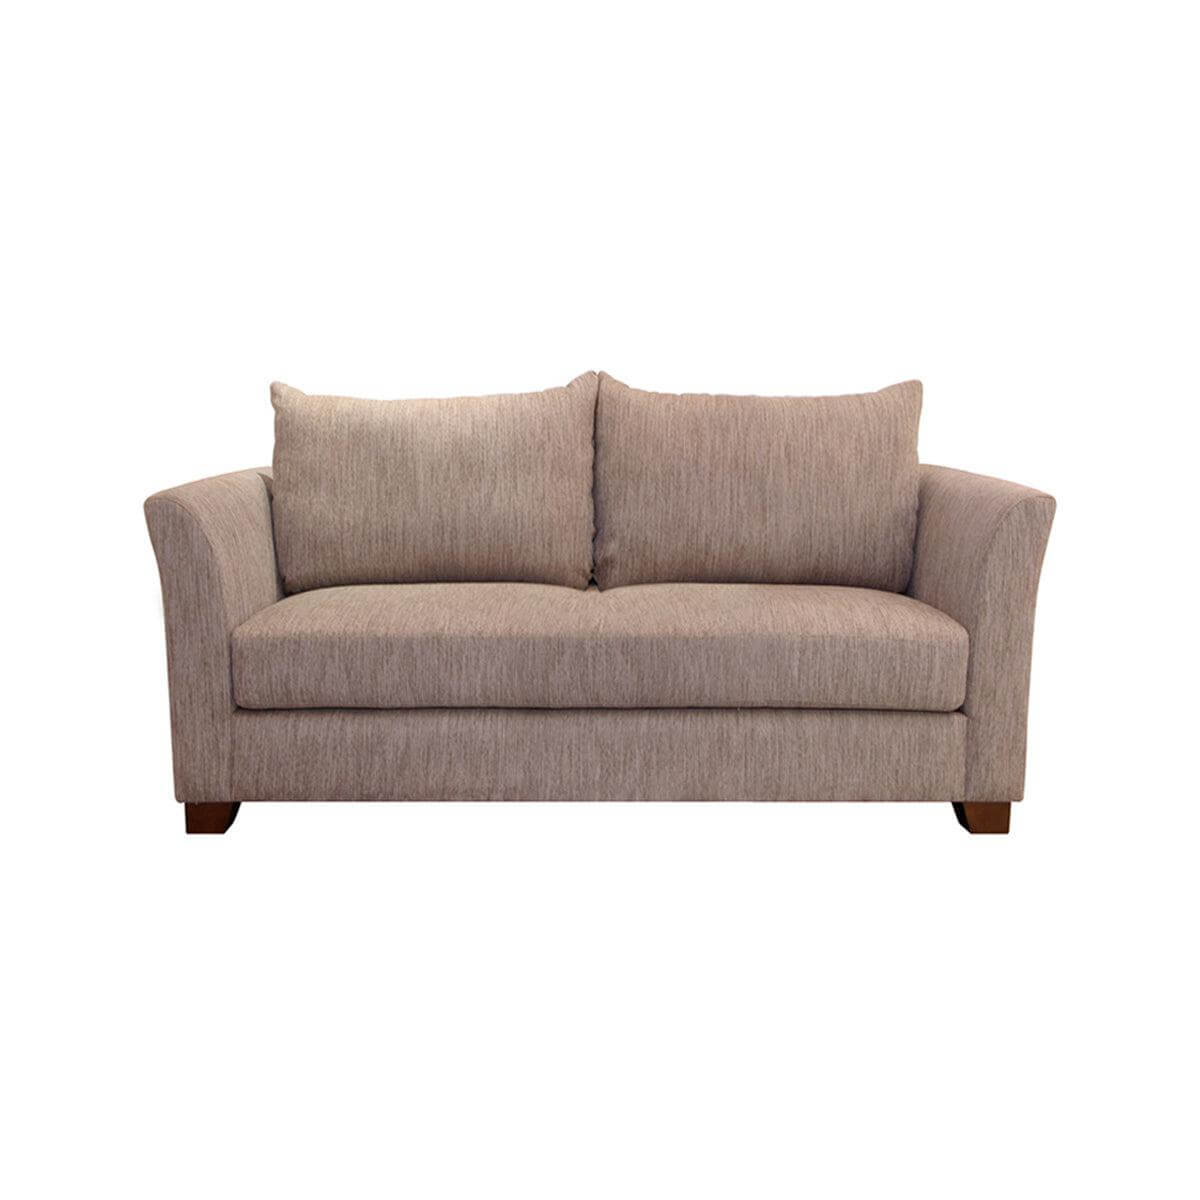 Simplicity two seat sofa, honesty and clean lines sofa